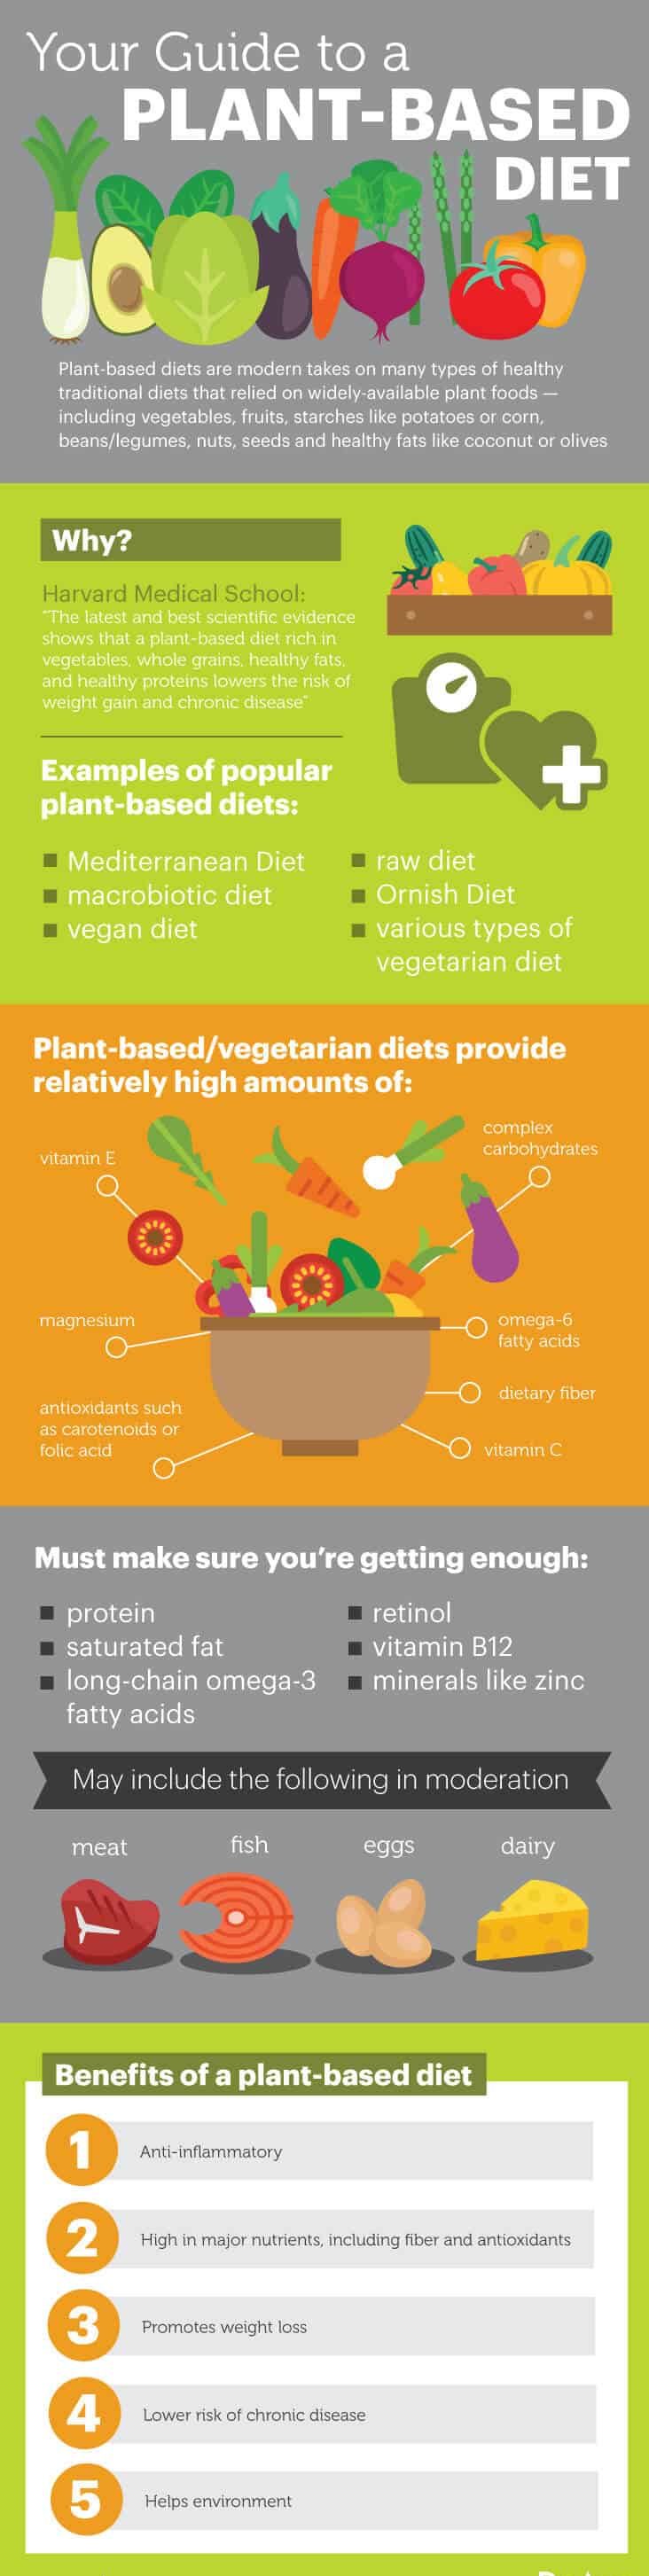 Plant-based diet guide - Dr. Axe